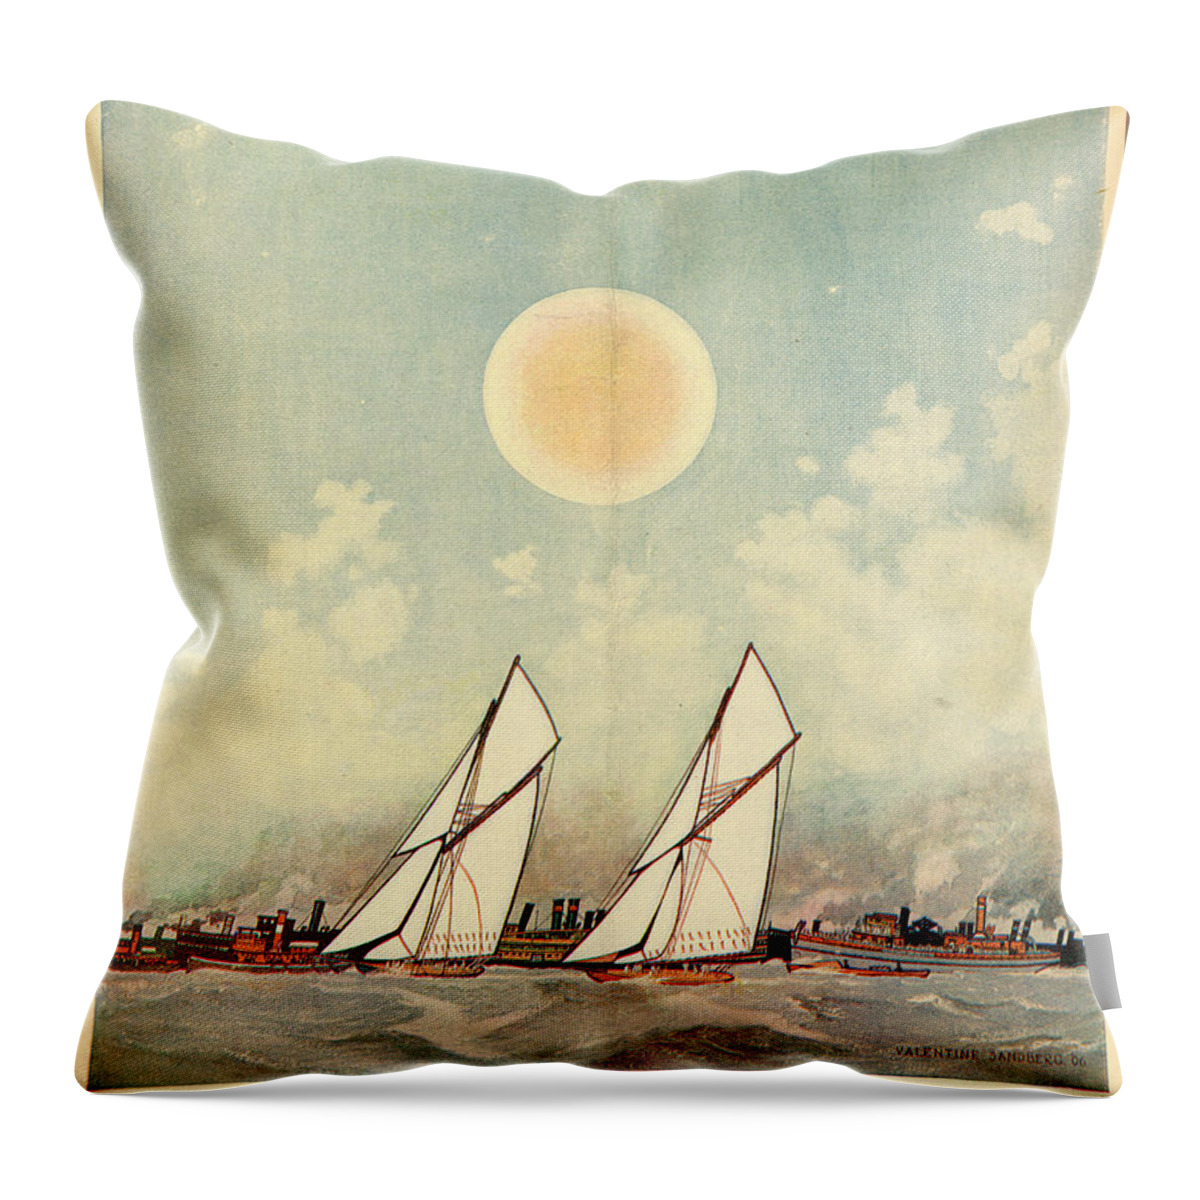 Boats Throw Pillow featuring the mixed media Life Magazine Cover, August 15, 1907 by Valentine Sandberg